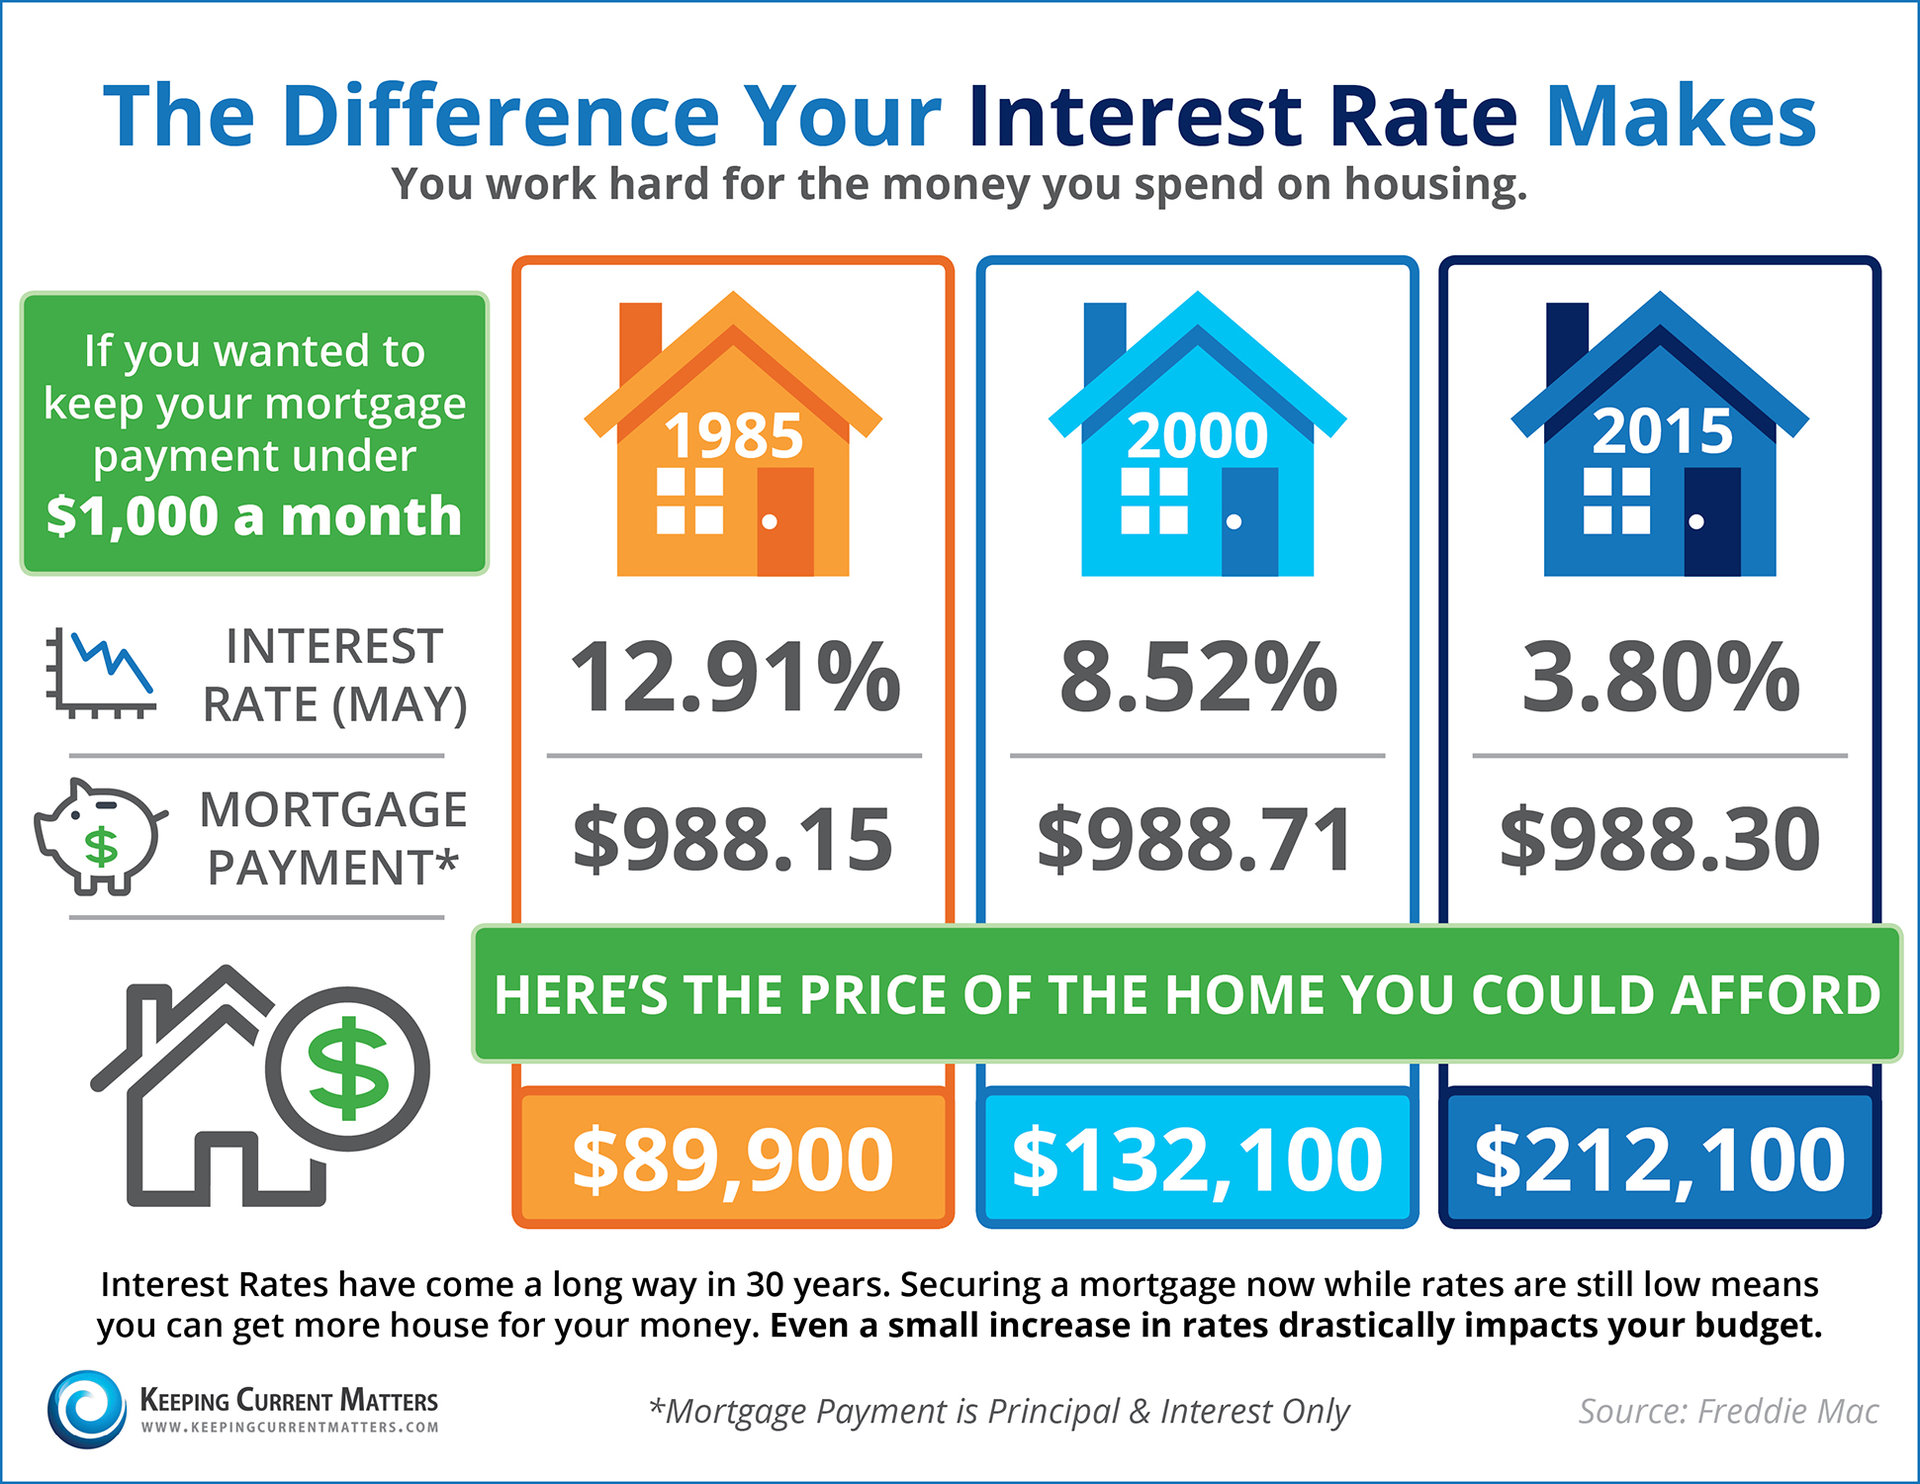 Interest Rates Make a Difference